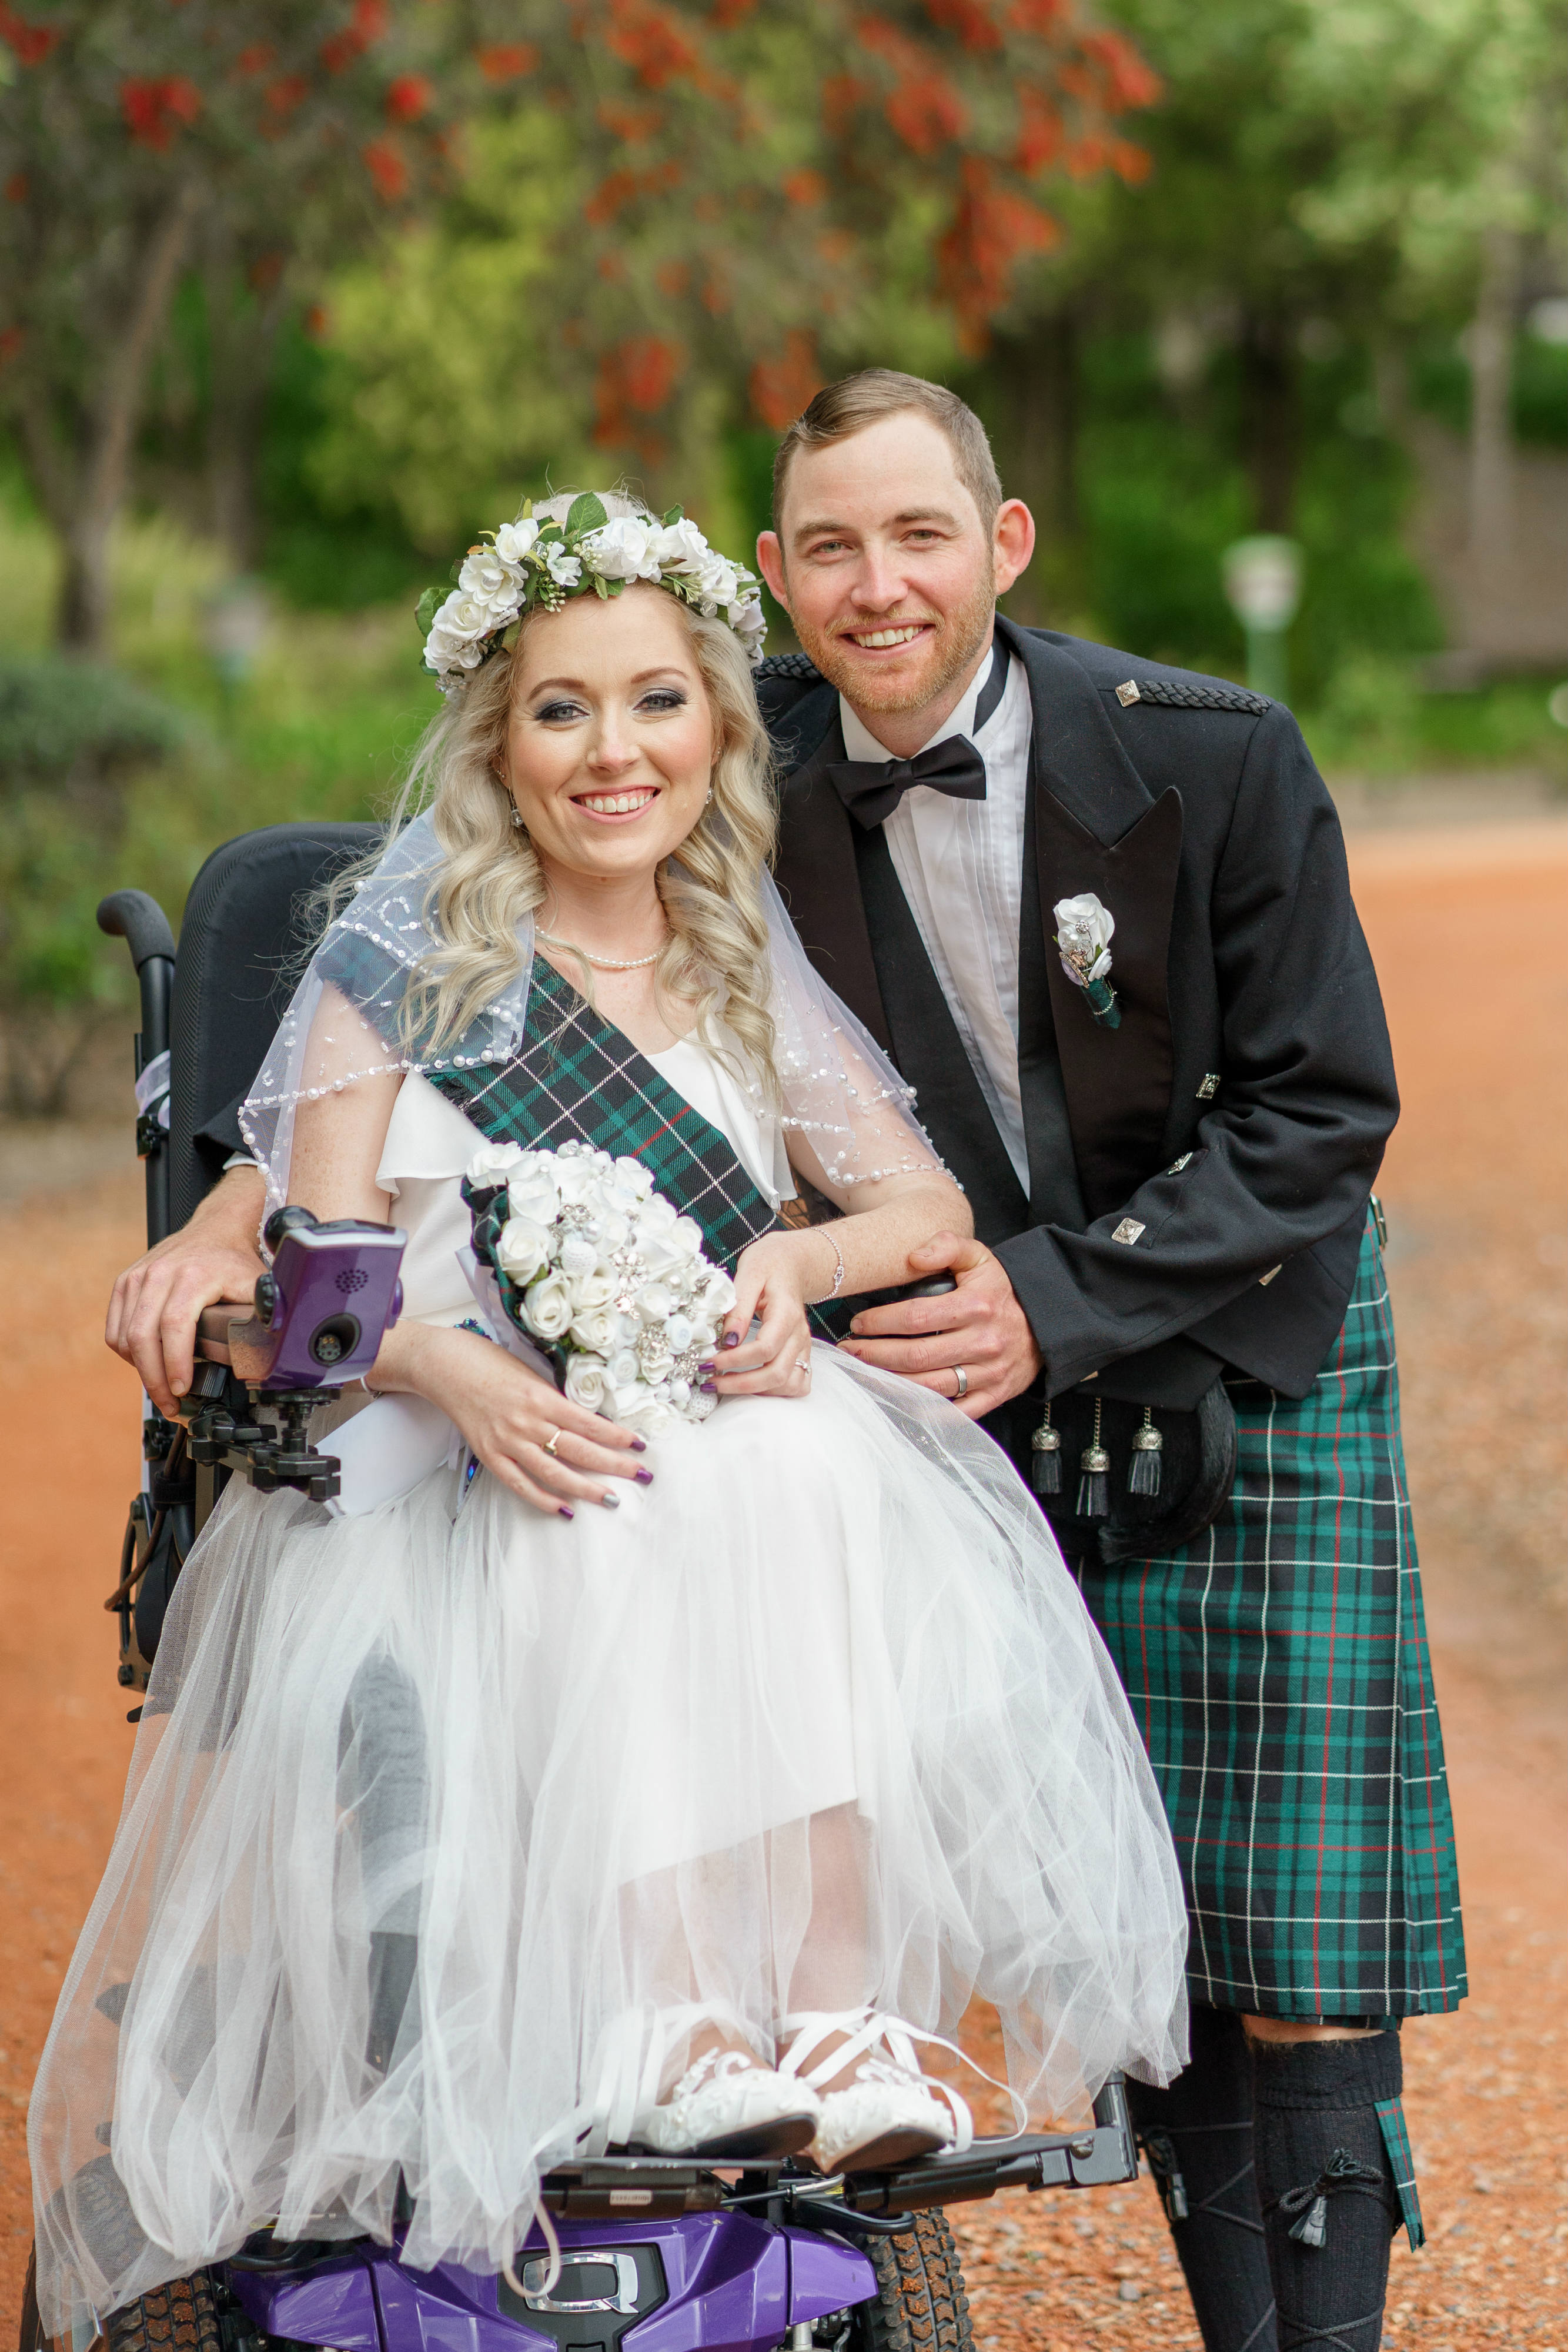 wedding day photo of couple, the young woman is in an ivory wedding dress, green tartan sash and in a purple wheelchair, her husband has a black jacket, bowtie and green kilt.